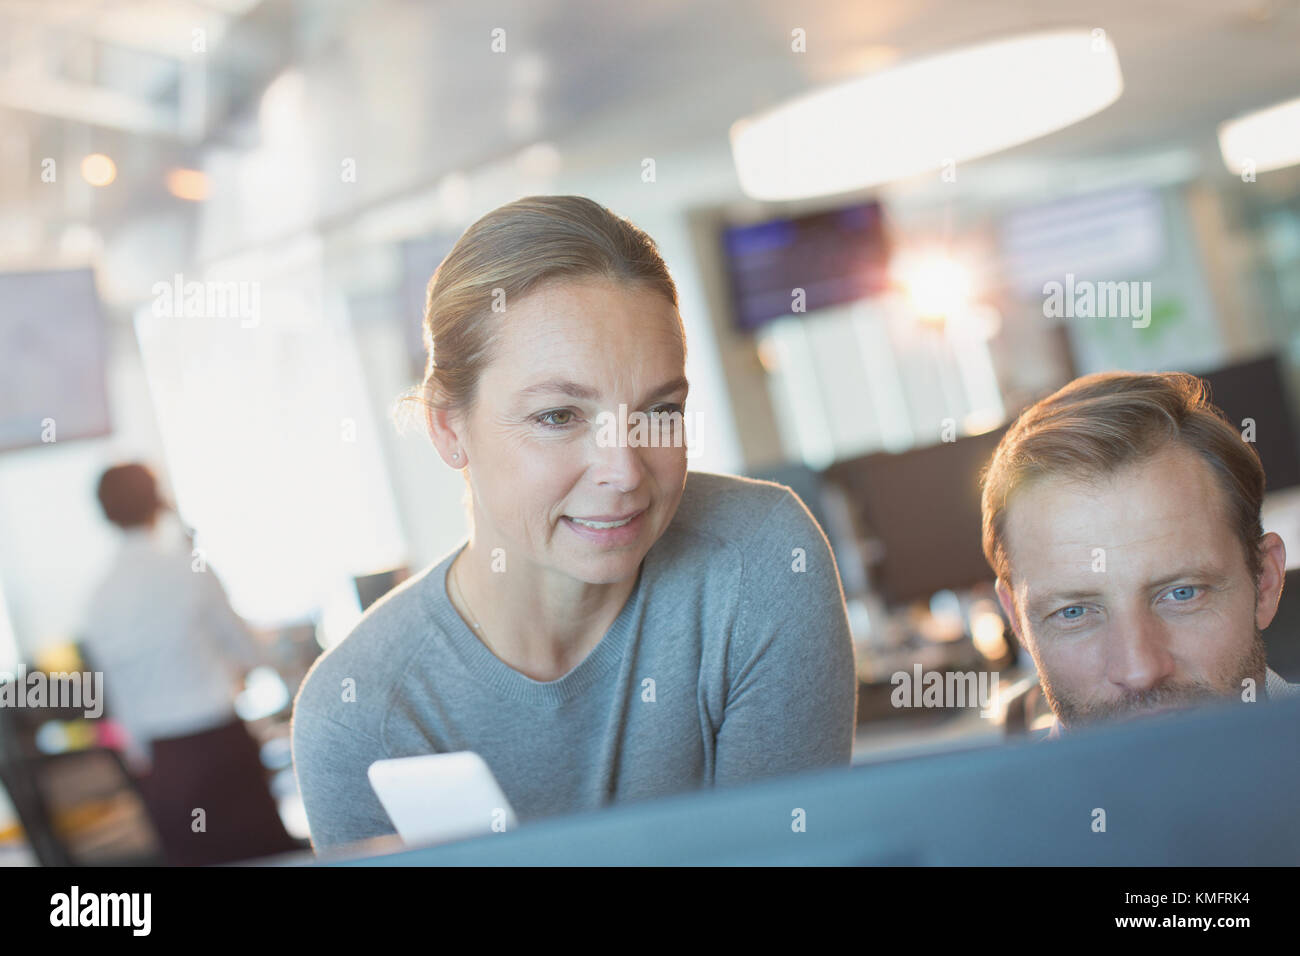 Businessman and businesswoman working at computer in office Banque D'Images